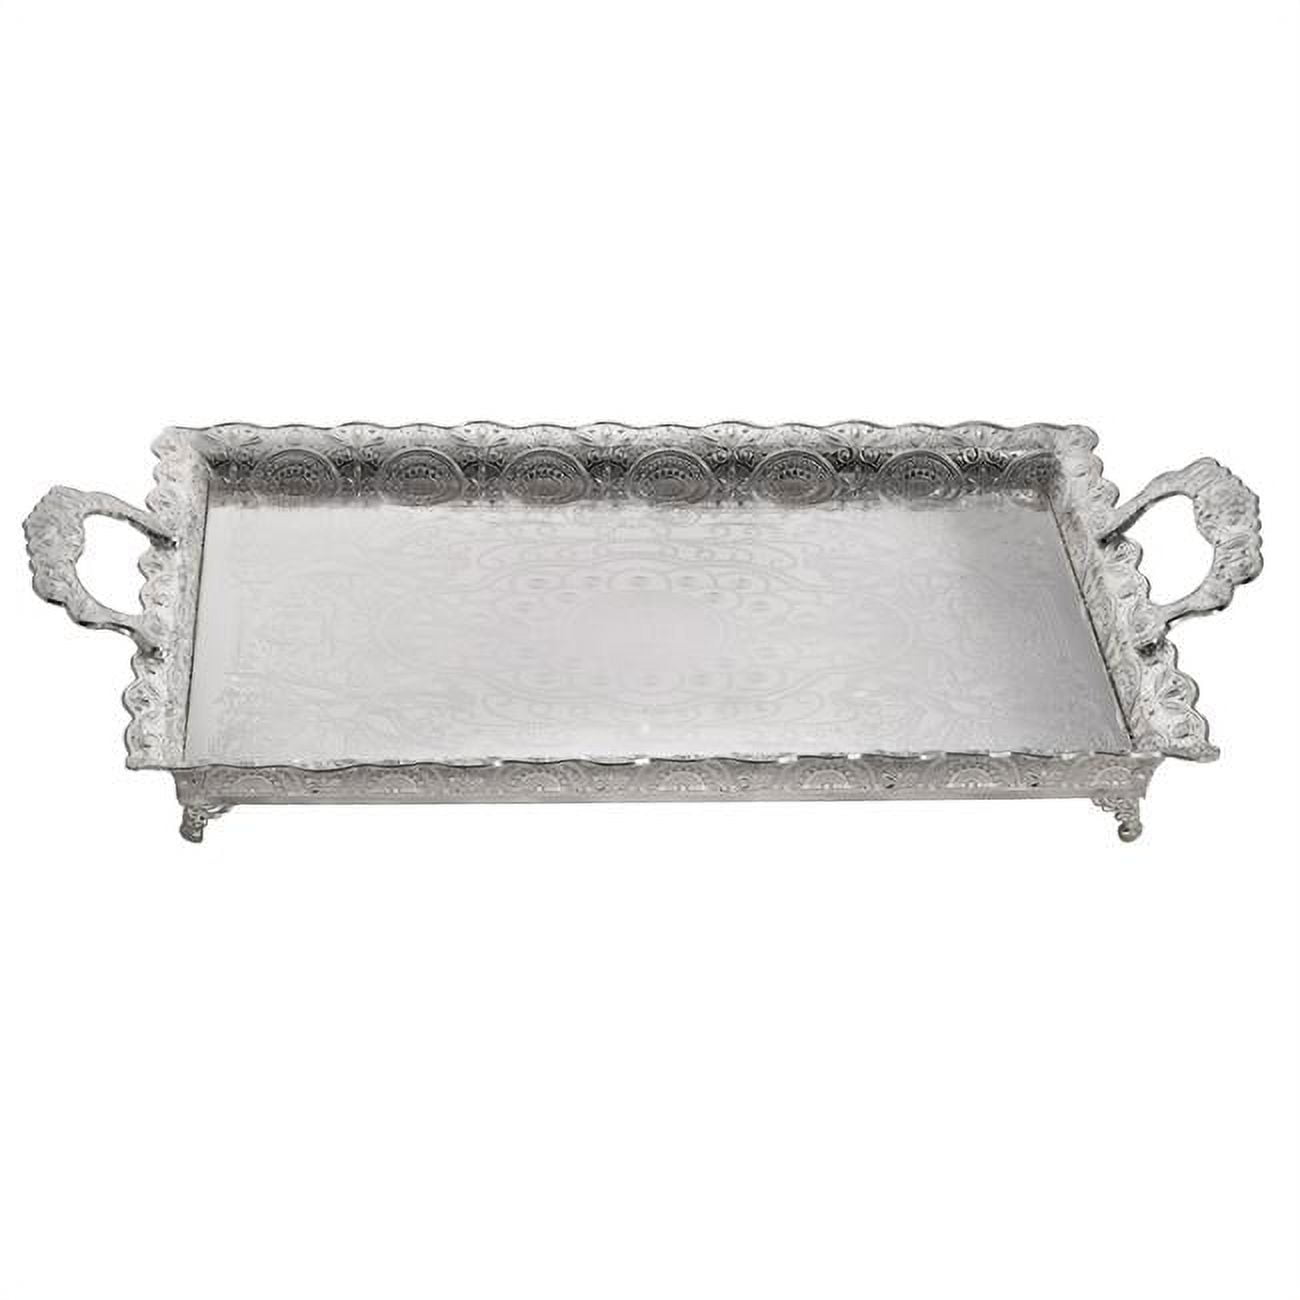 Picture of Nua 58168 21.5 x 16 in. Filigree Silver Plated Large Tray for Candles